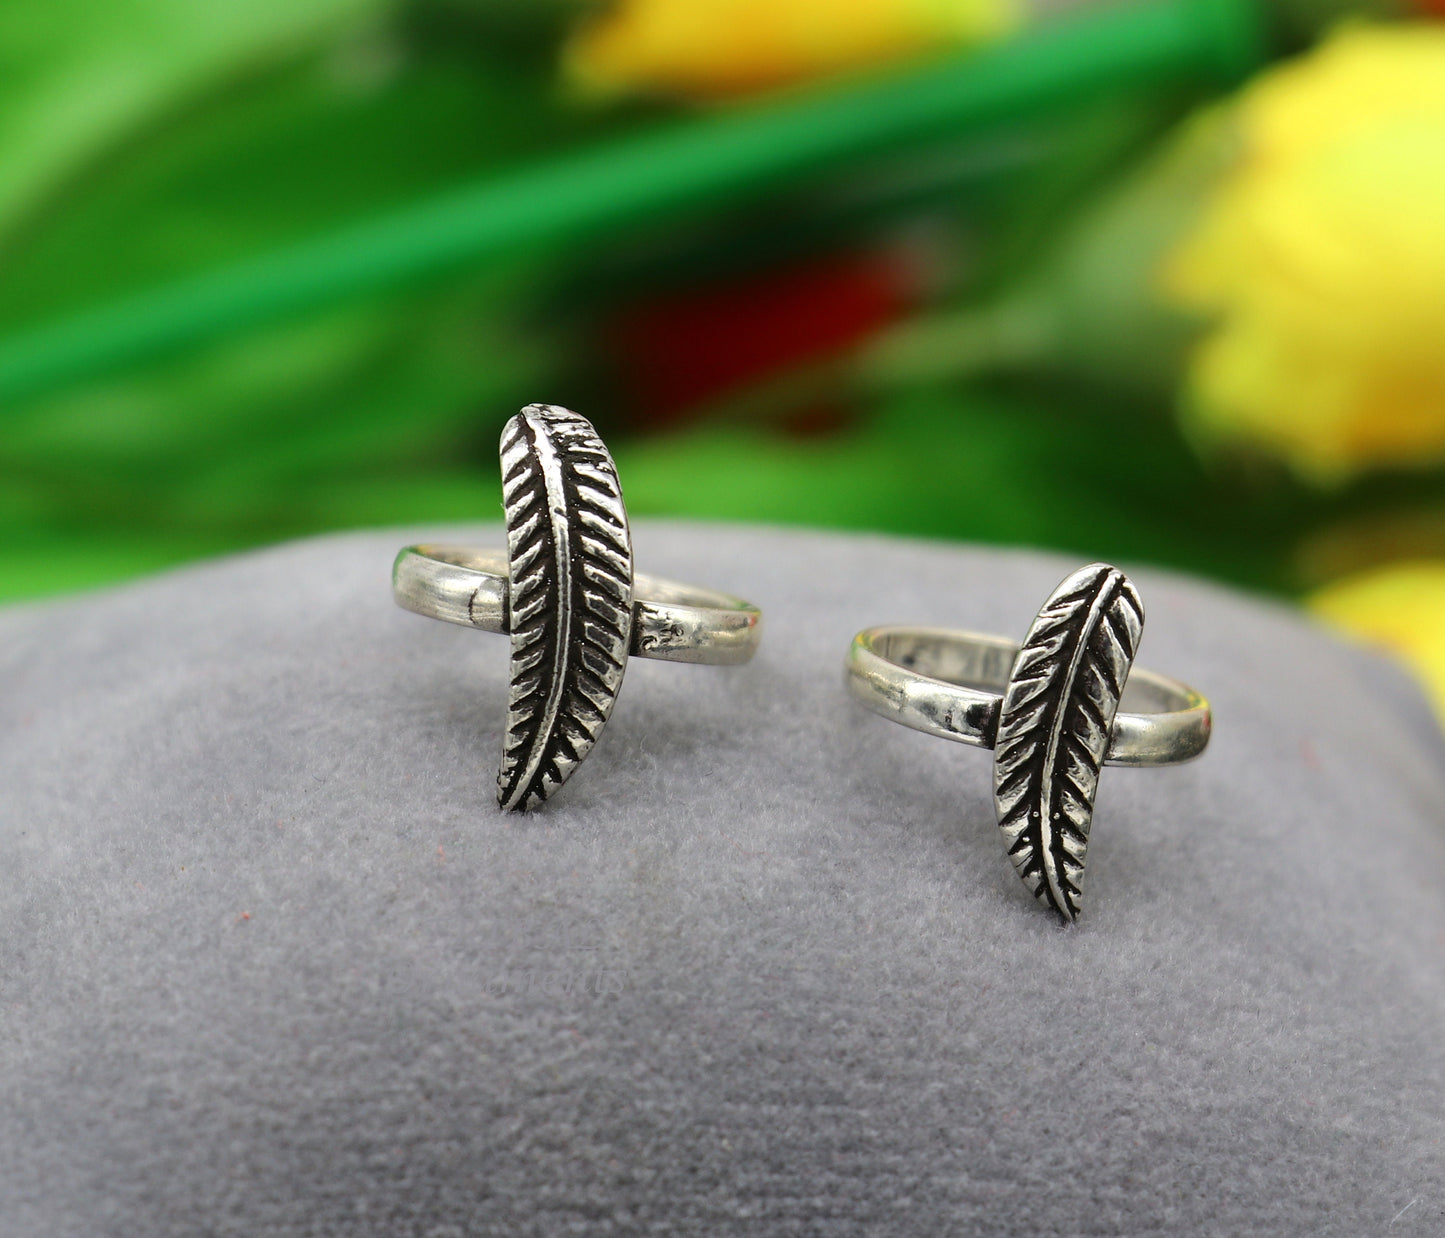 925 sterling silver amazing leaf design handmade toe ring, toe band stylish modern women's brides jewelry, india traditional jewelry ytr47 - TRIBAL ORNAMENTS